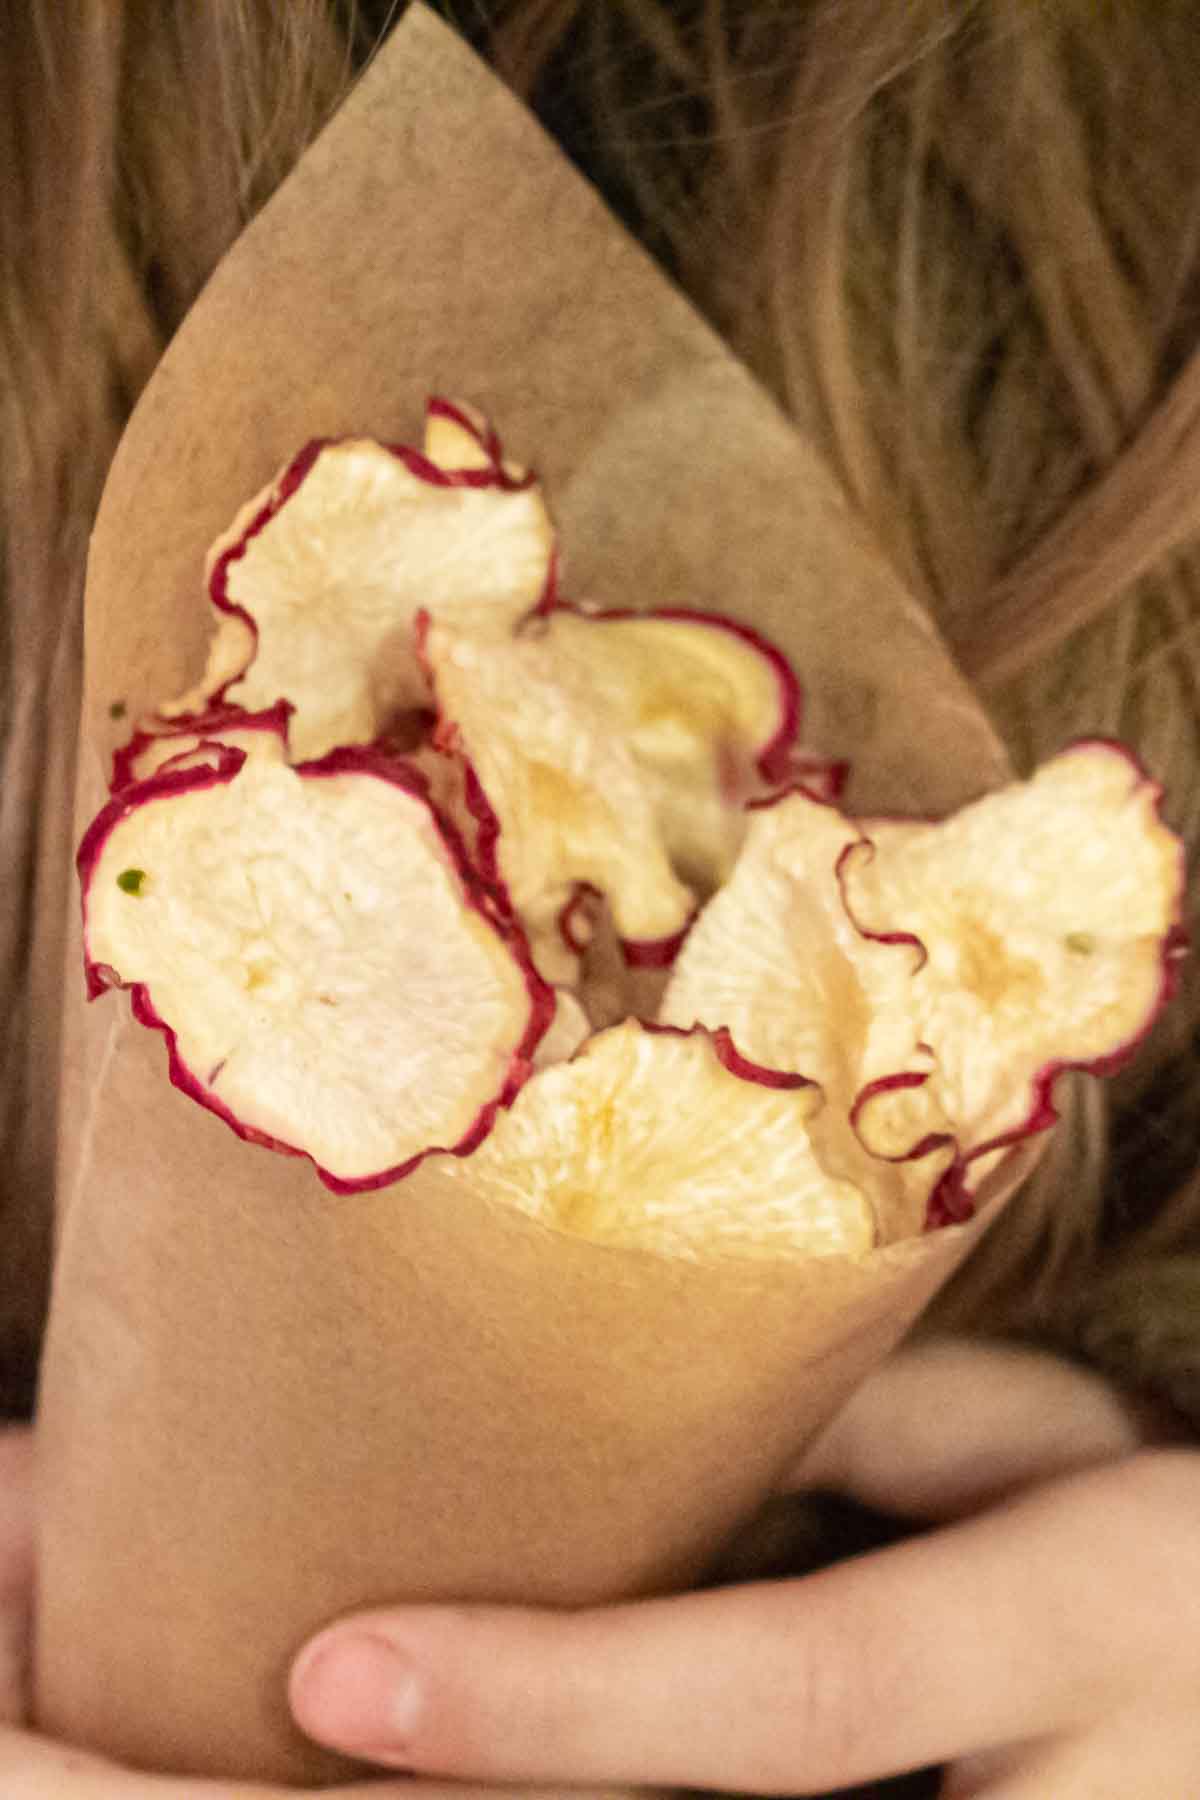 A girl holding a paper bag with sliced radishes in it.